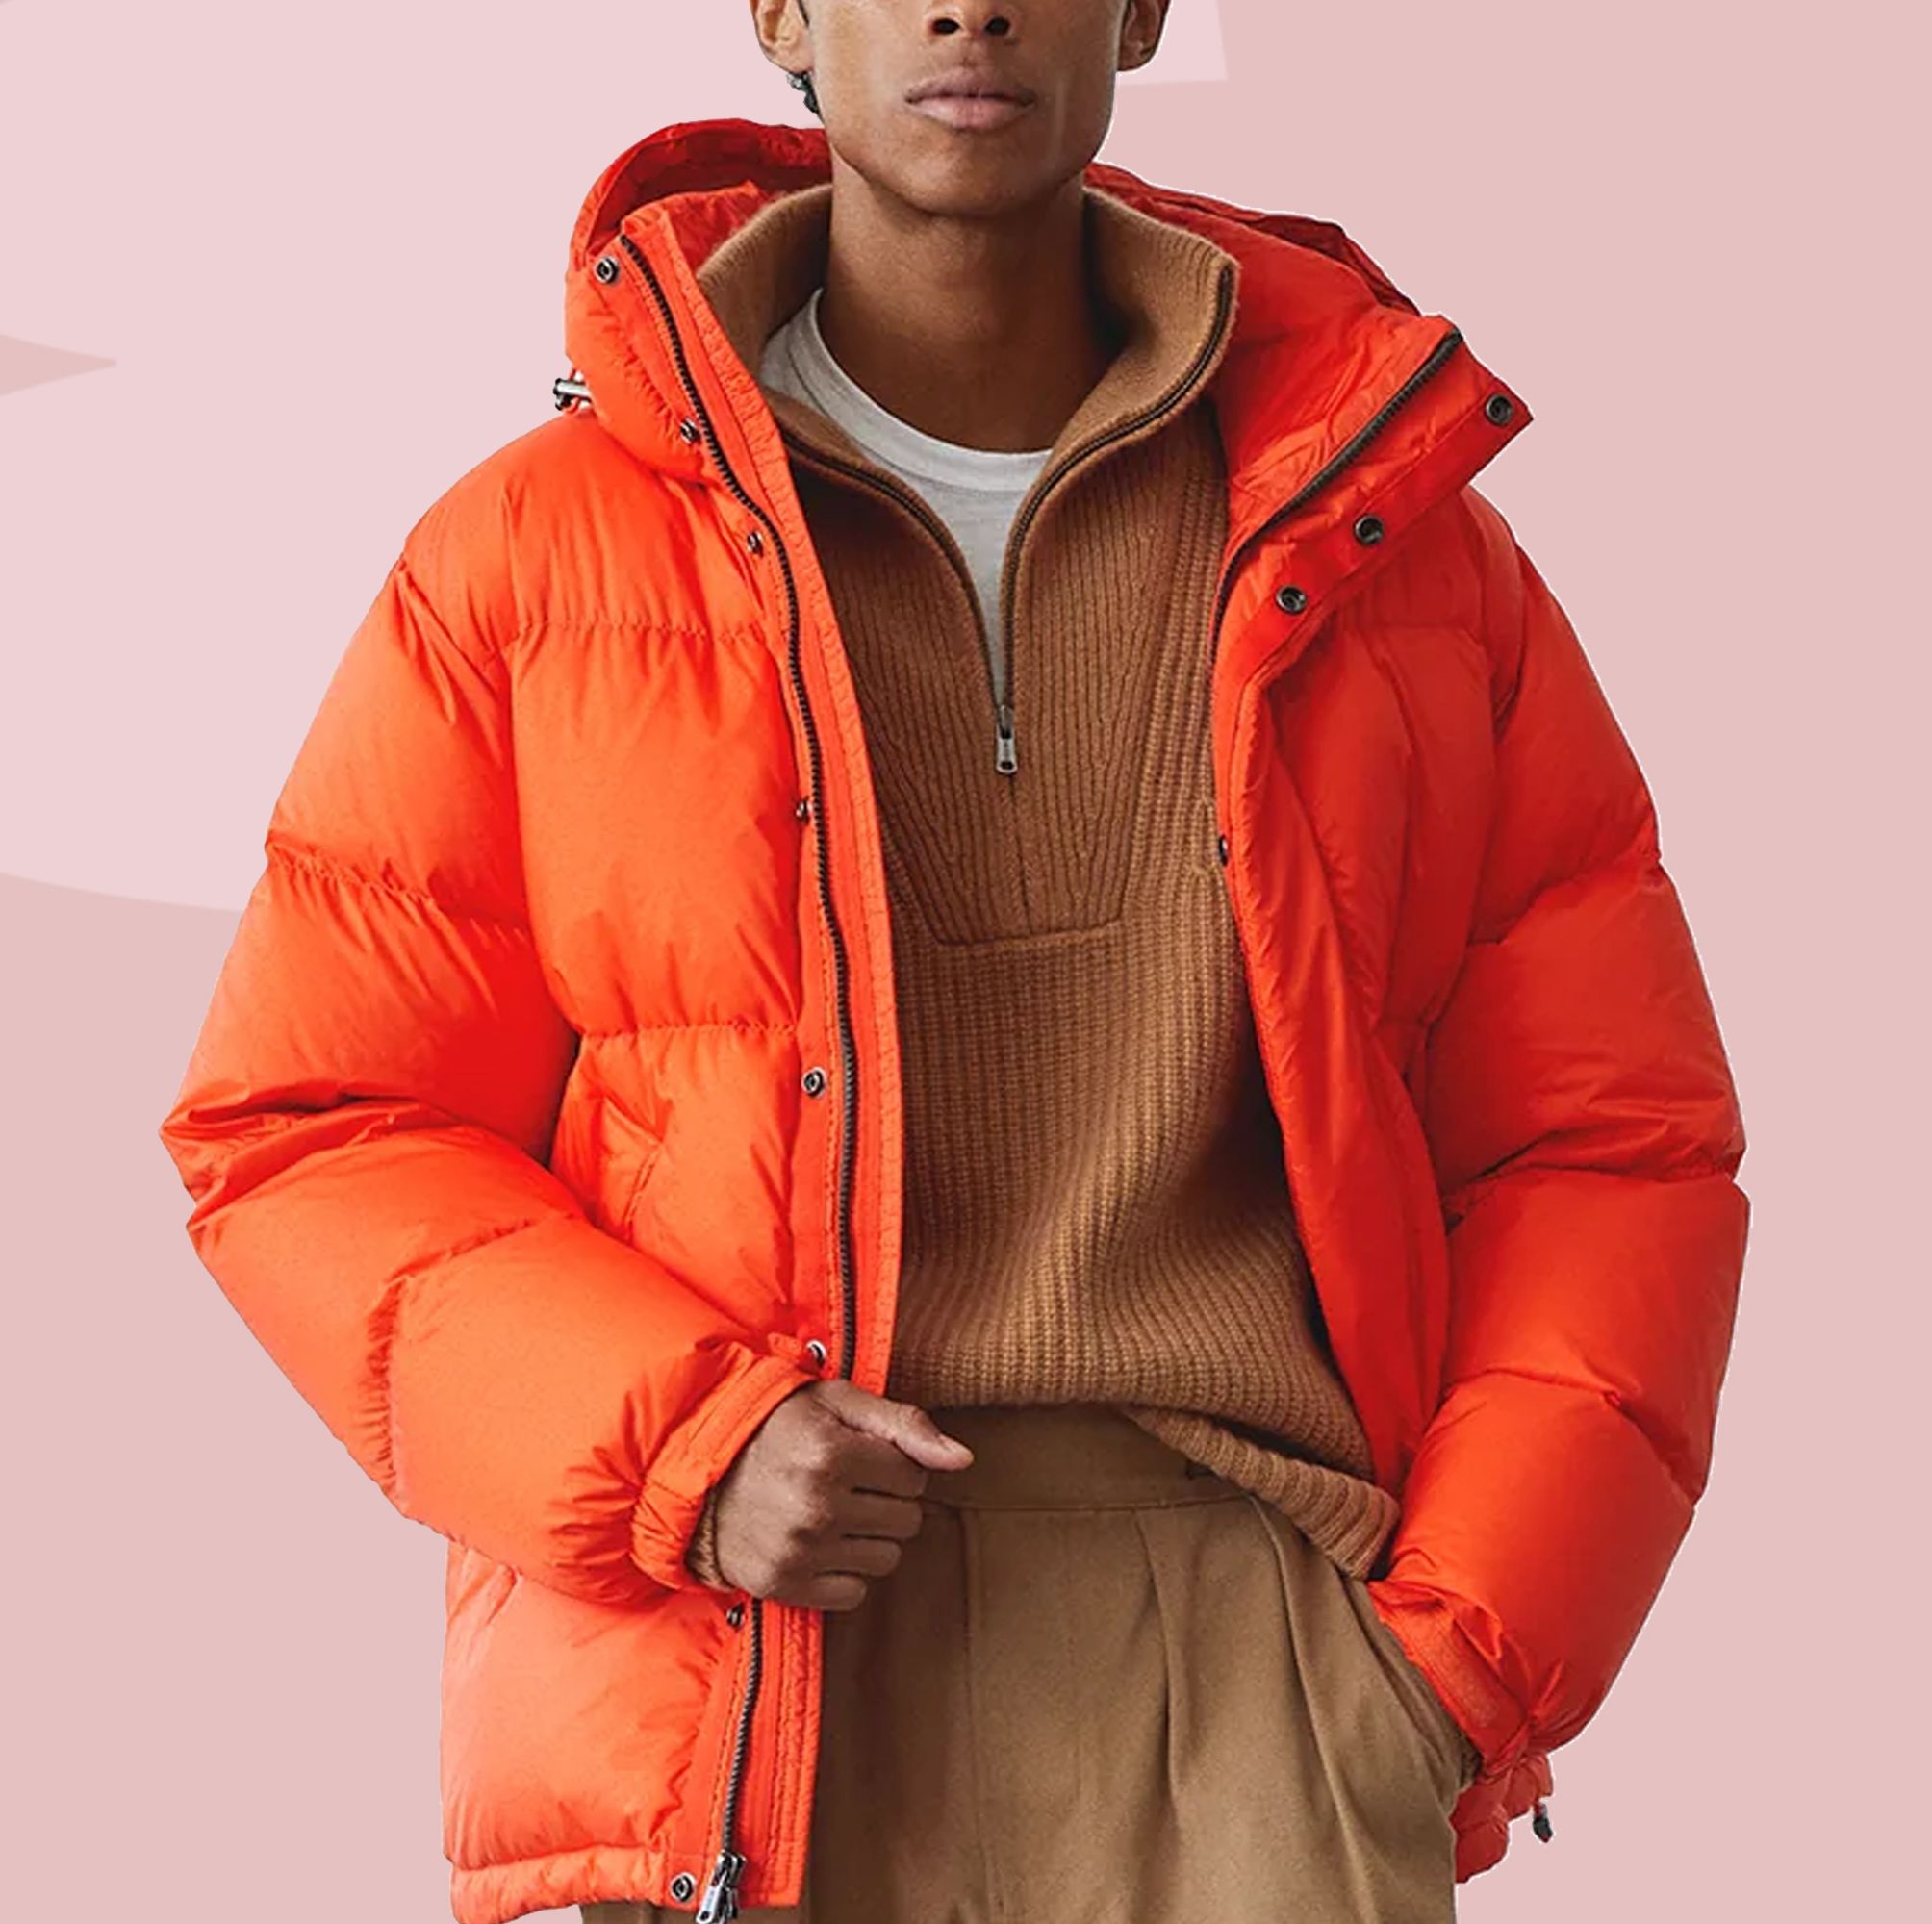 10 Winter Parkas That'll Keep You Feeling Warm—and Looking Cool